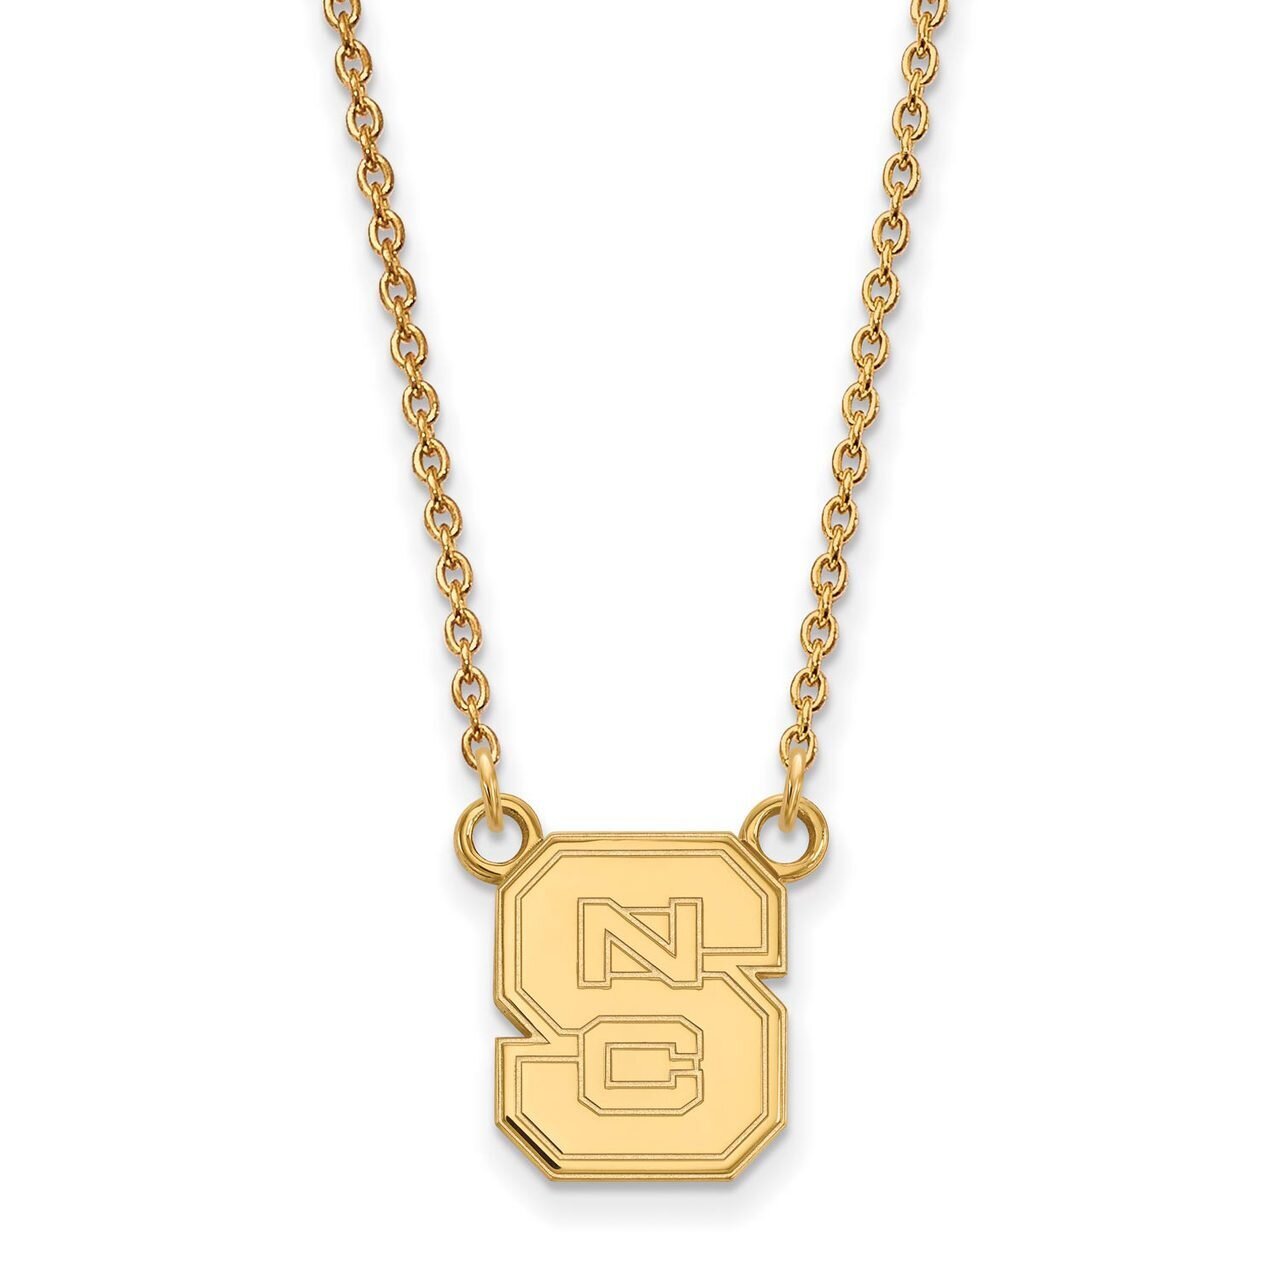 North Carolina State University Small Pendant with Chain Necklace 14k Yellow Gold 4Y015NCS-18